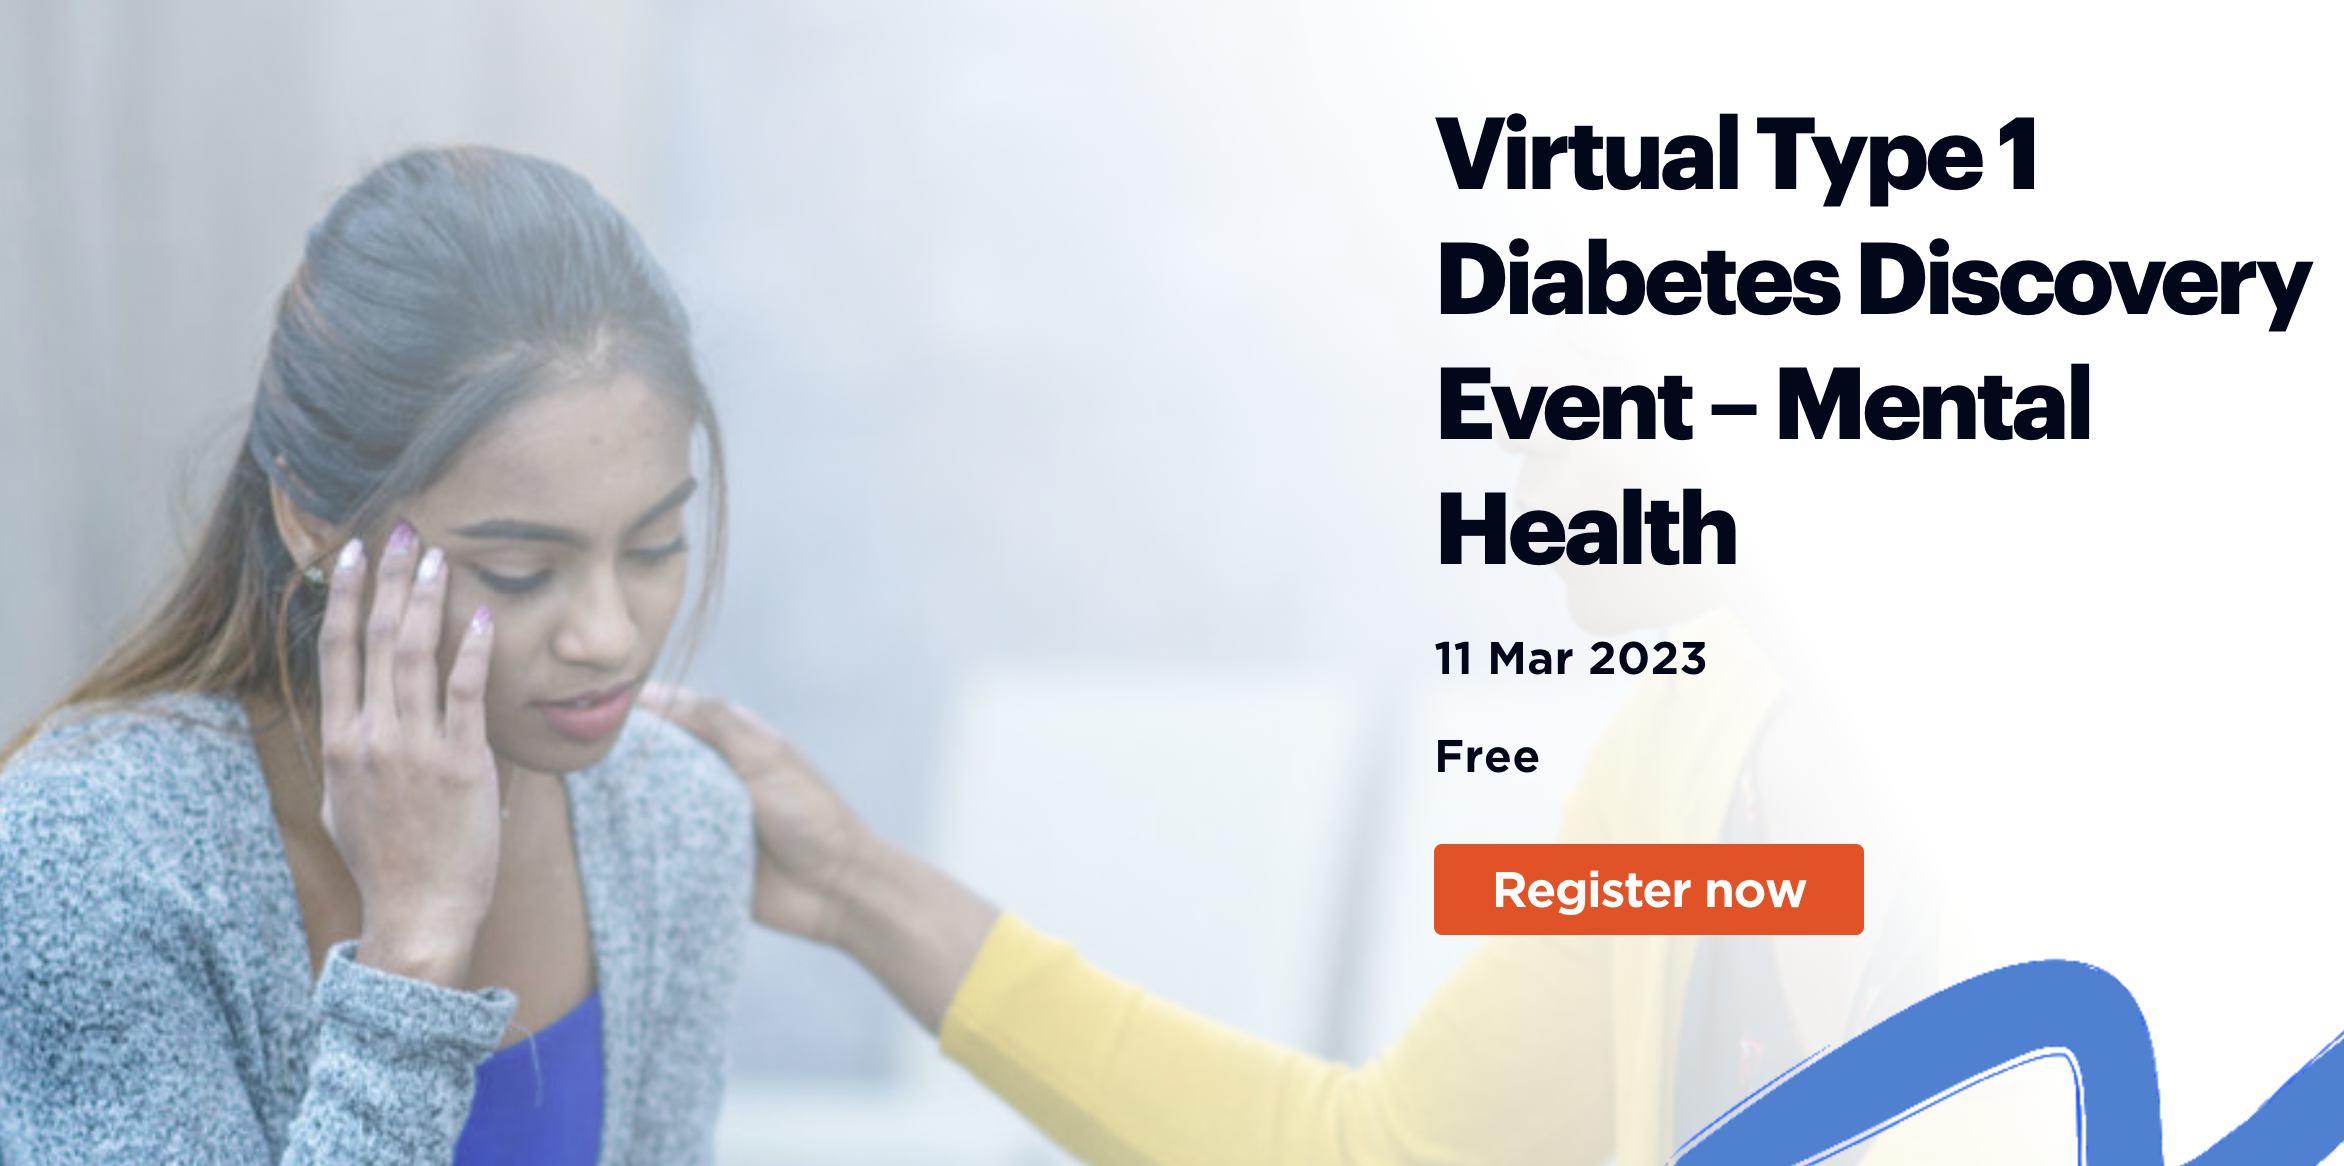 JDRF Virtual Type 1 Diabetes Discovery Event – Mental Health